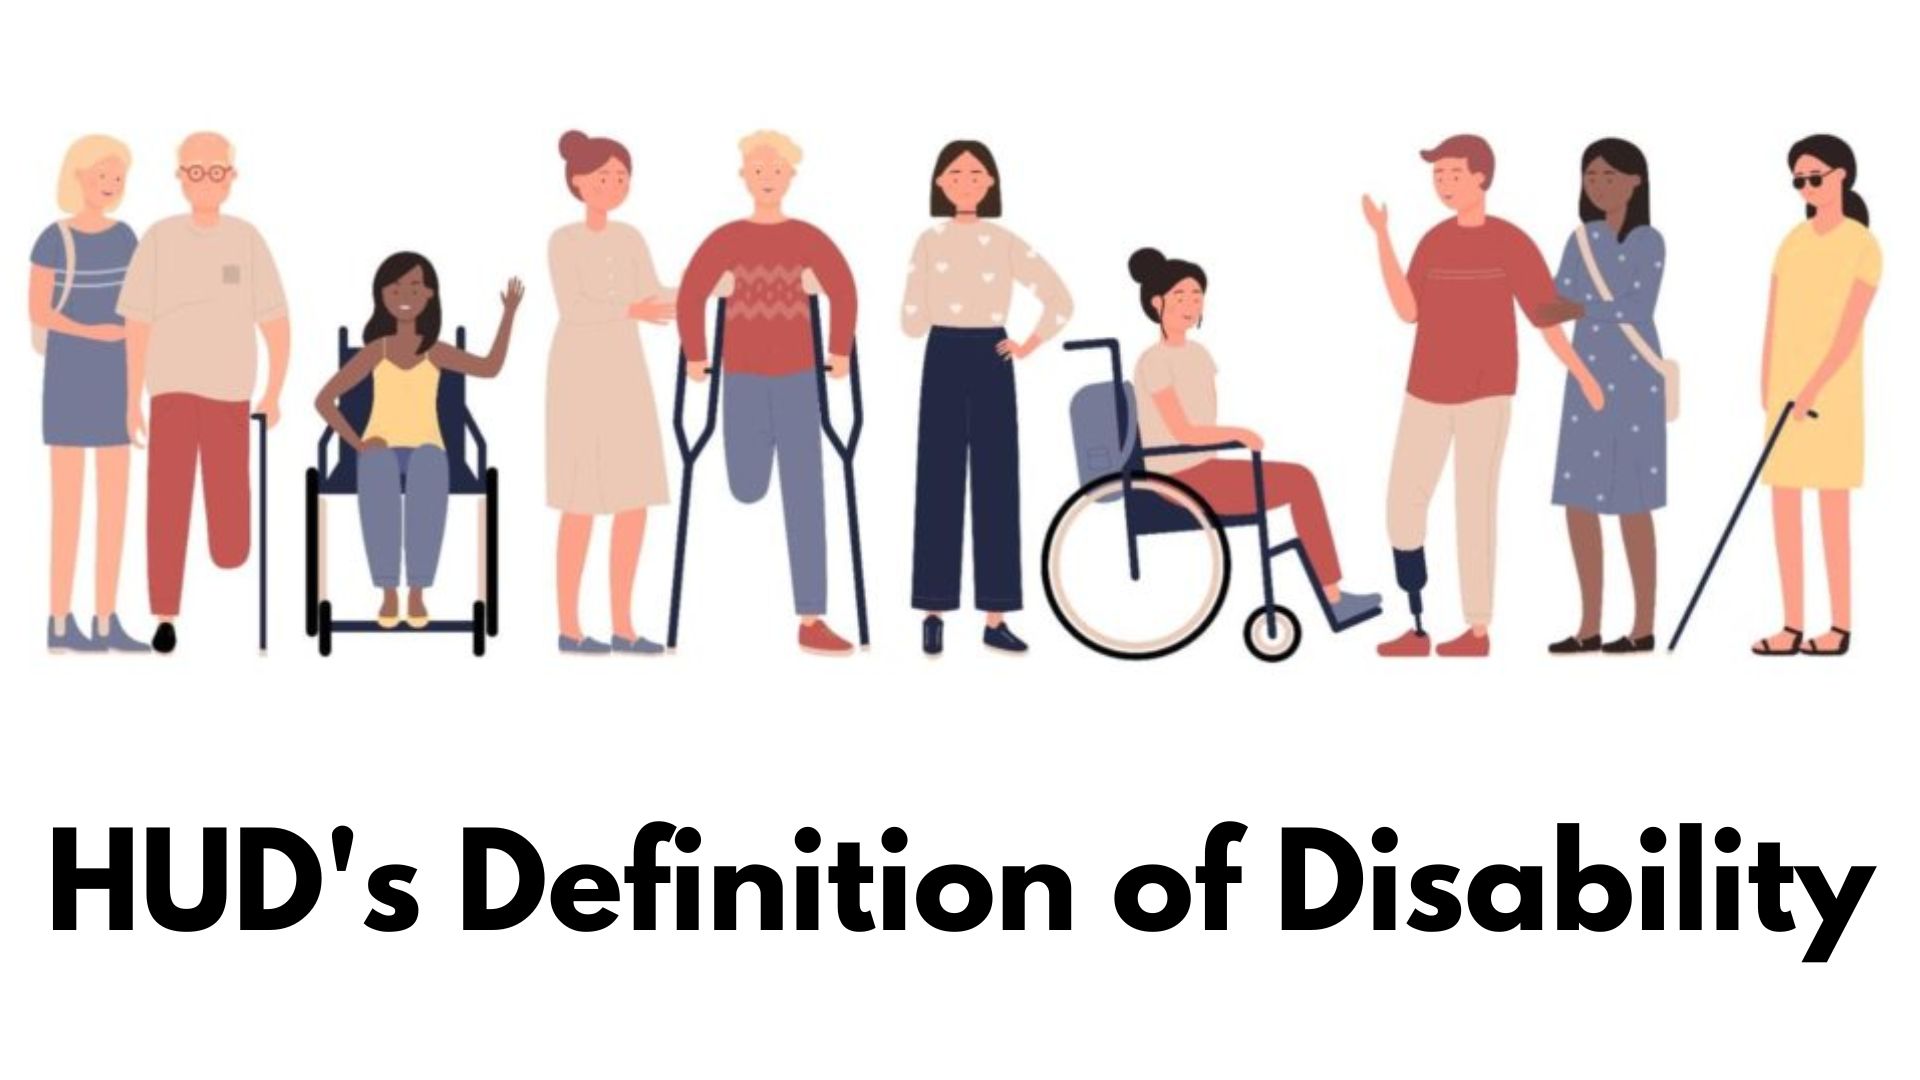 HUD's Definition of Disability